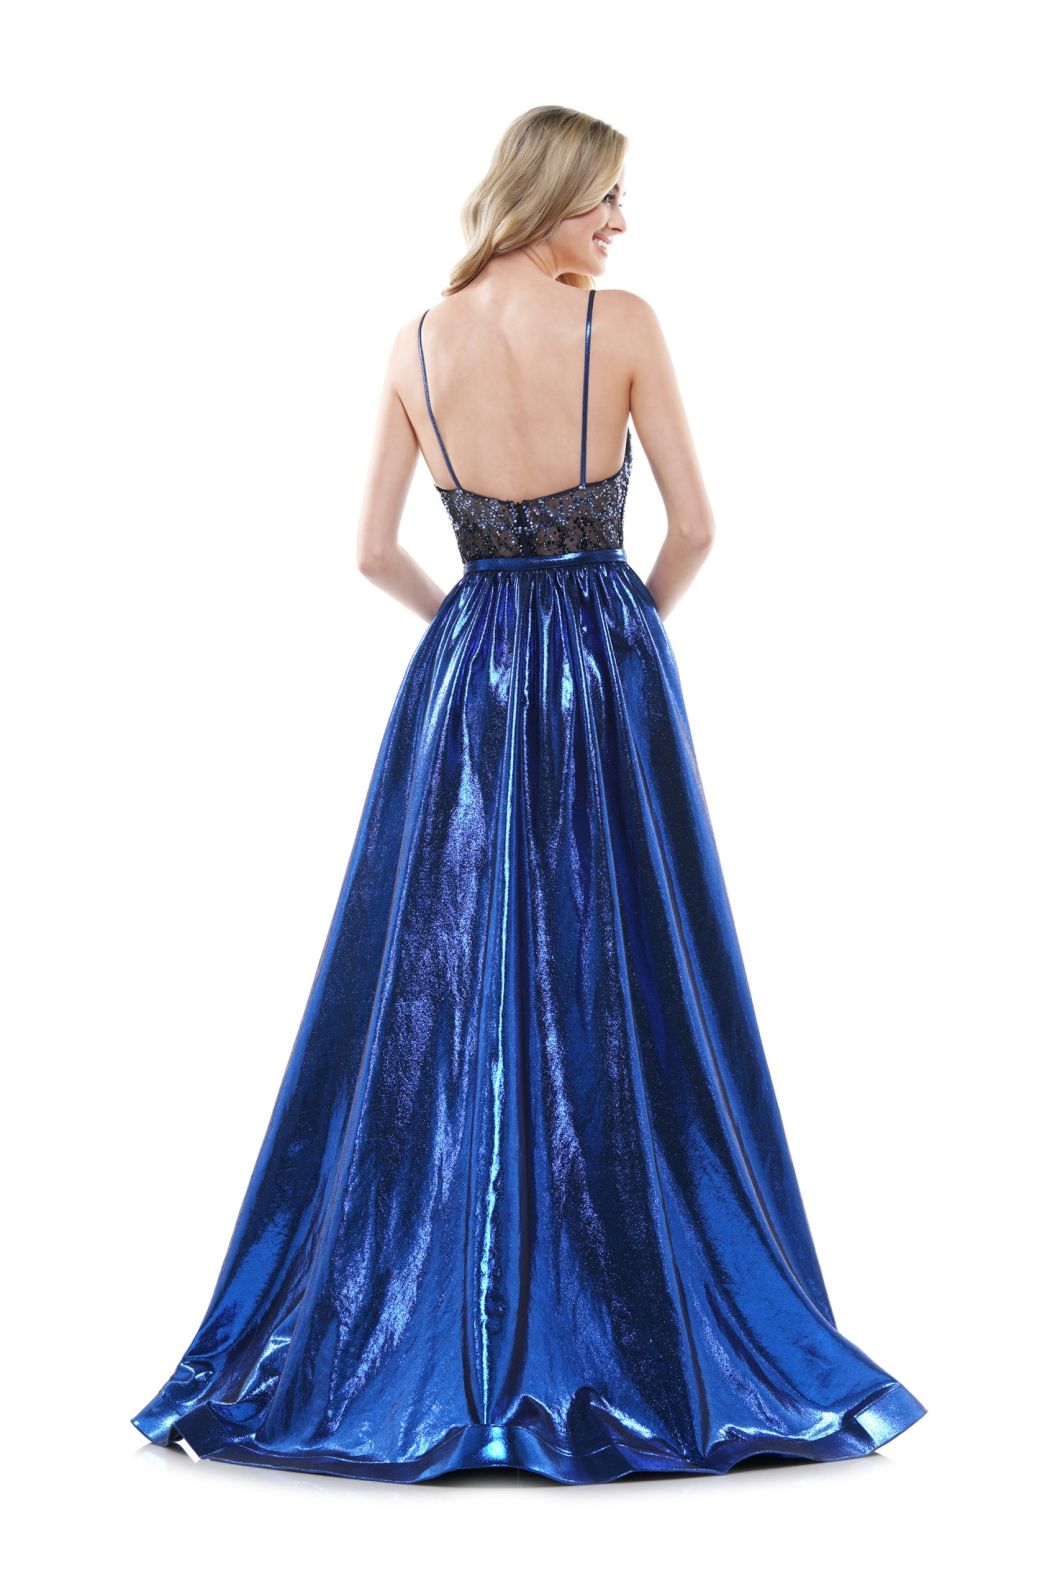 Royal blue Over Skirt Spaghetti Straps Party Fromal Dress Two in One Sequins Prom Evening Dress